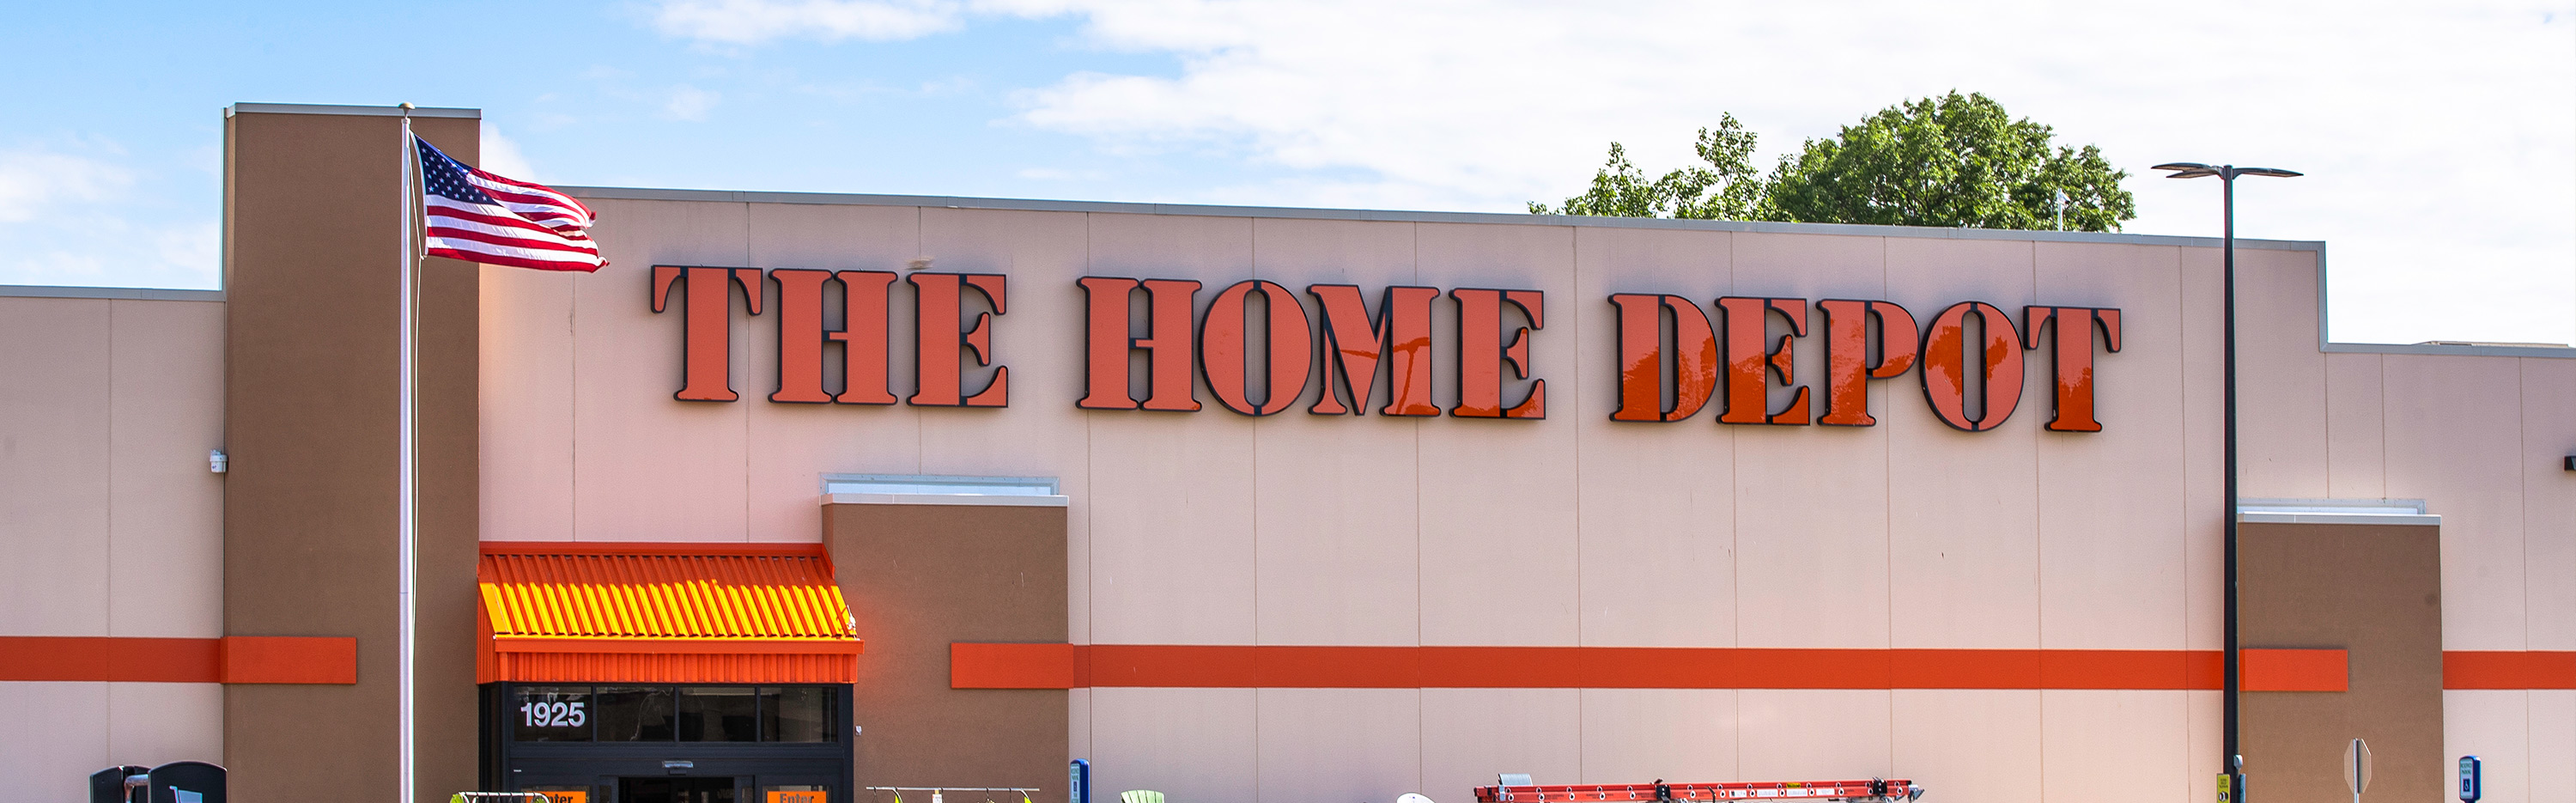 Header_The Home Depot Temporarily Adjusts Store Hours and Extends Paid